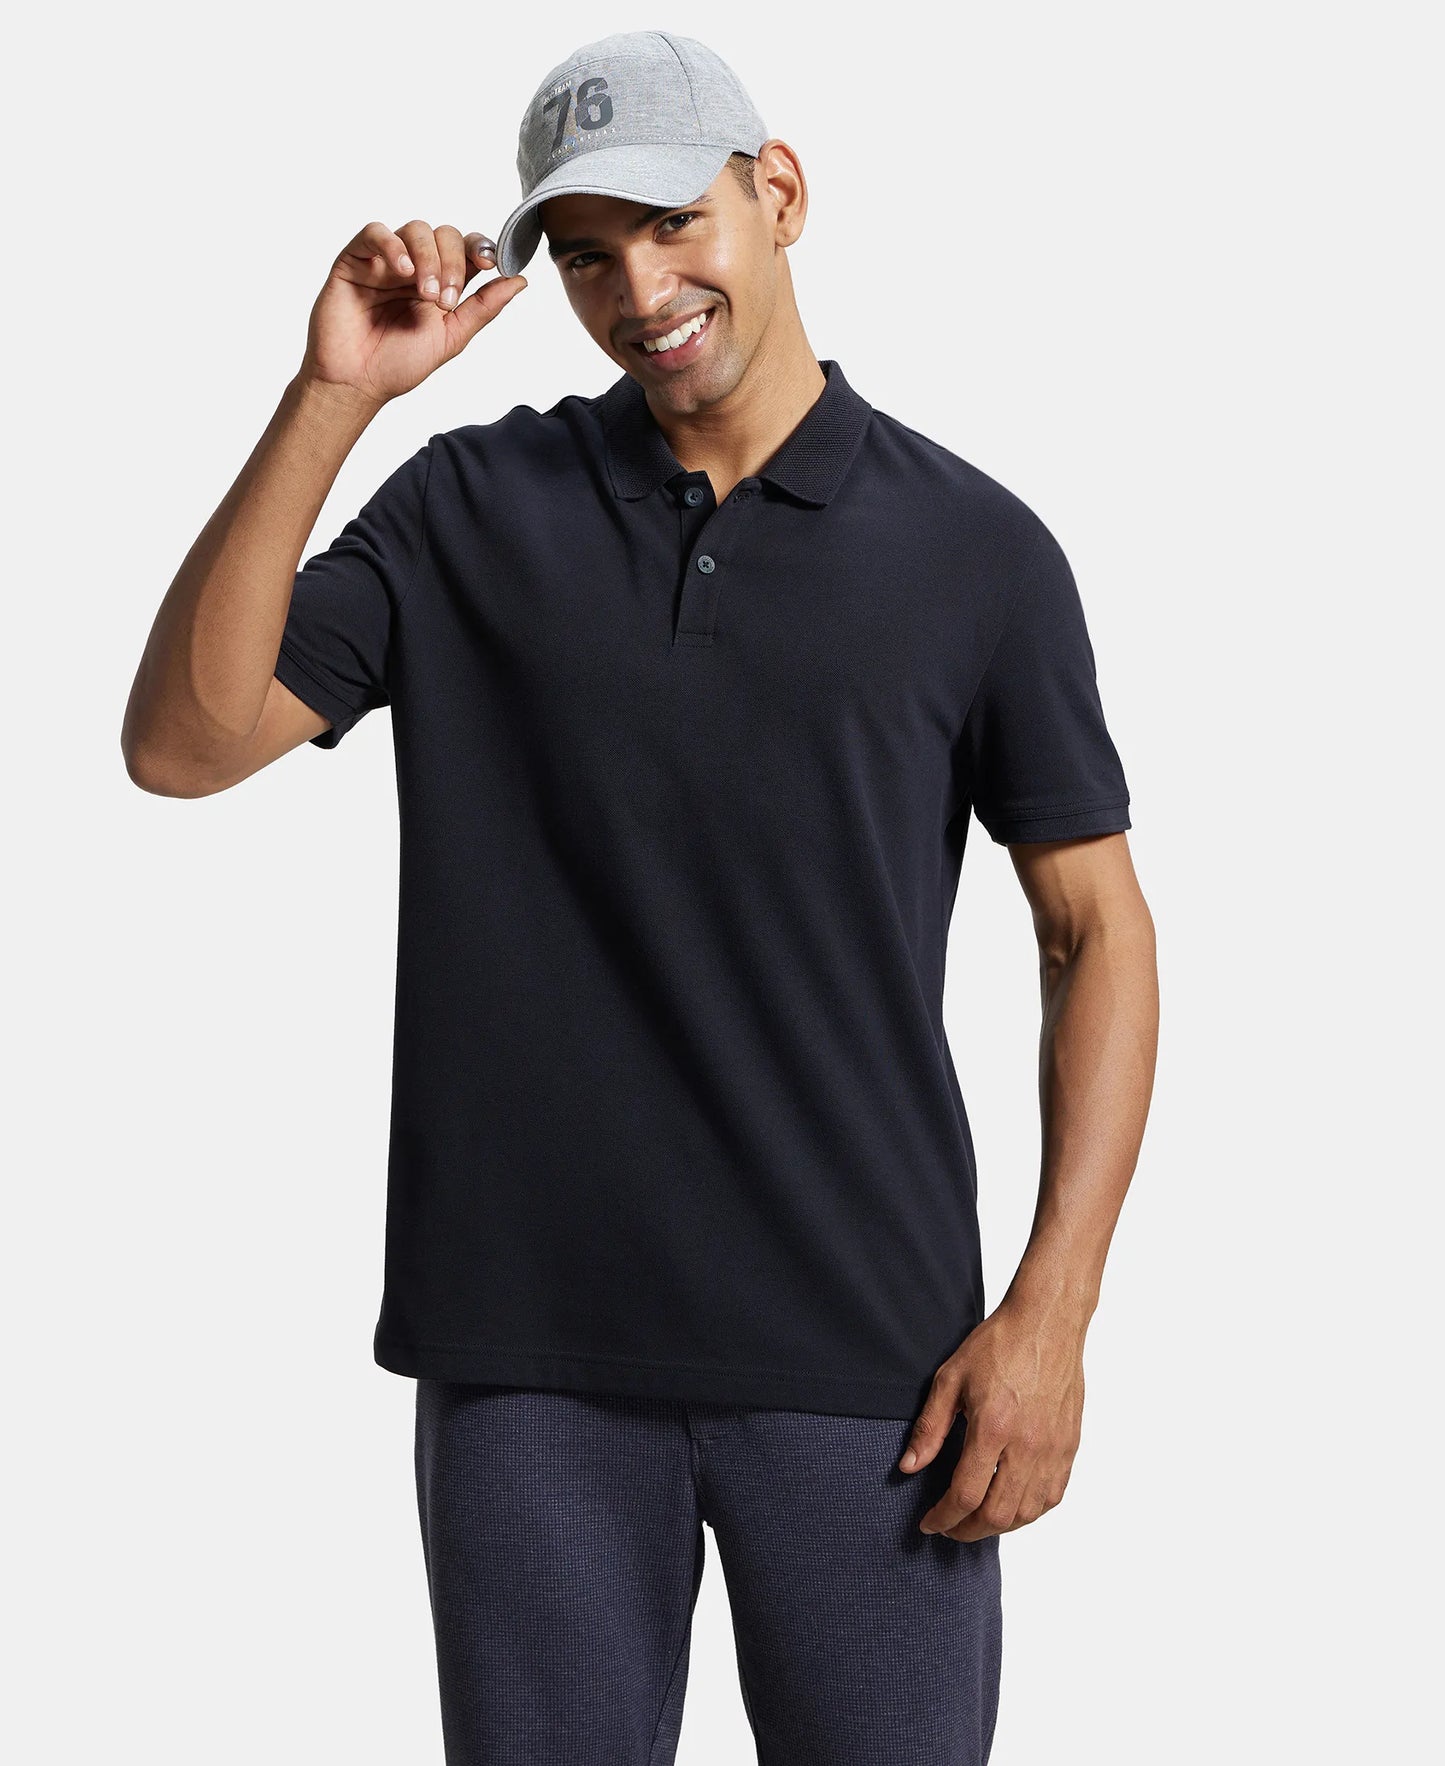 Super Combed Cotton Rich Pique Fabric Solid Half Sleeve Polo T-Shirt - Black-6